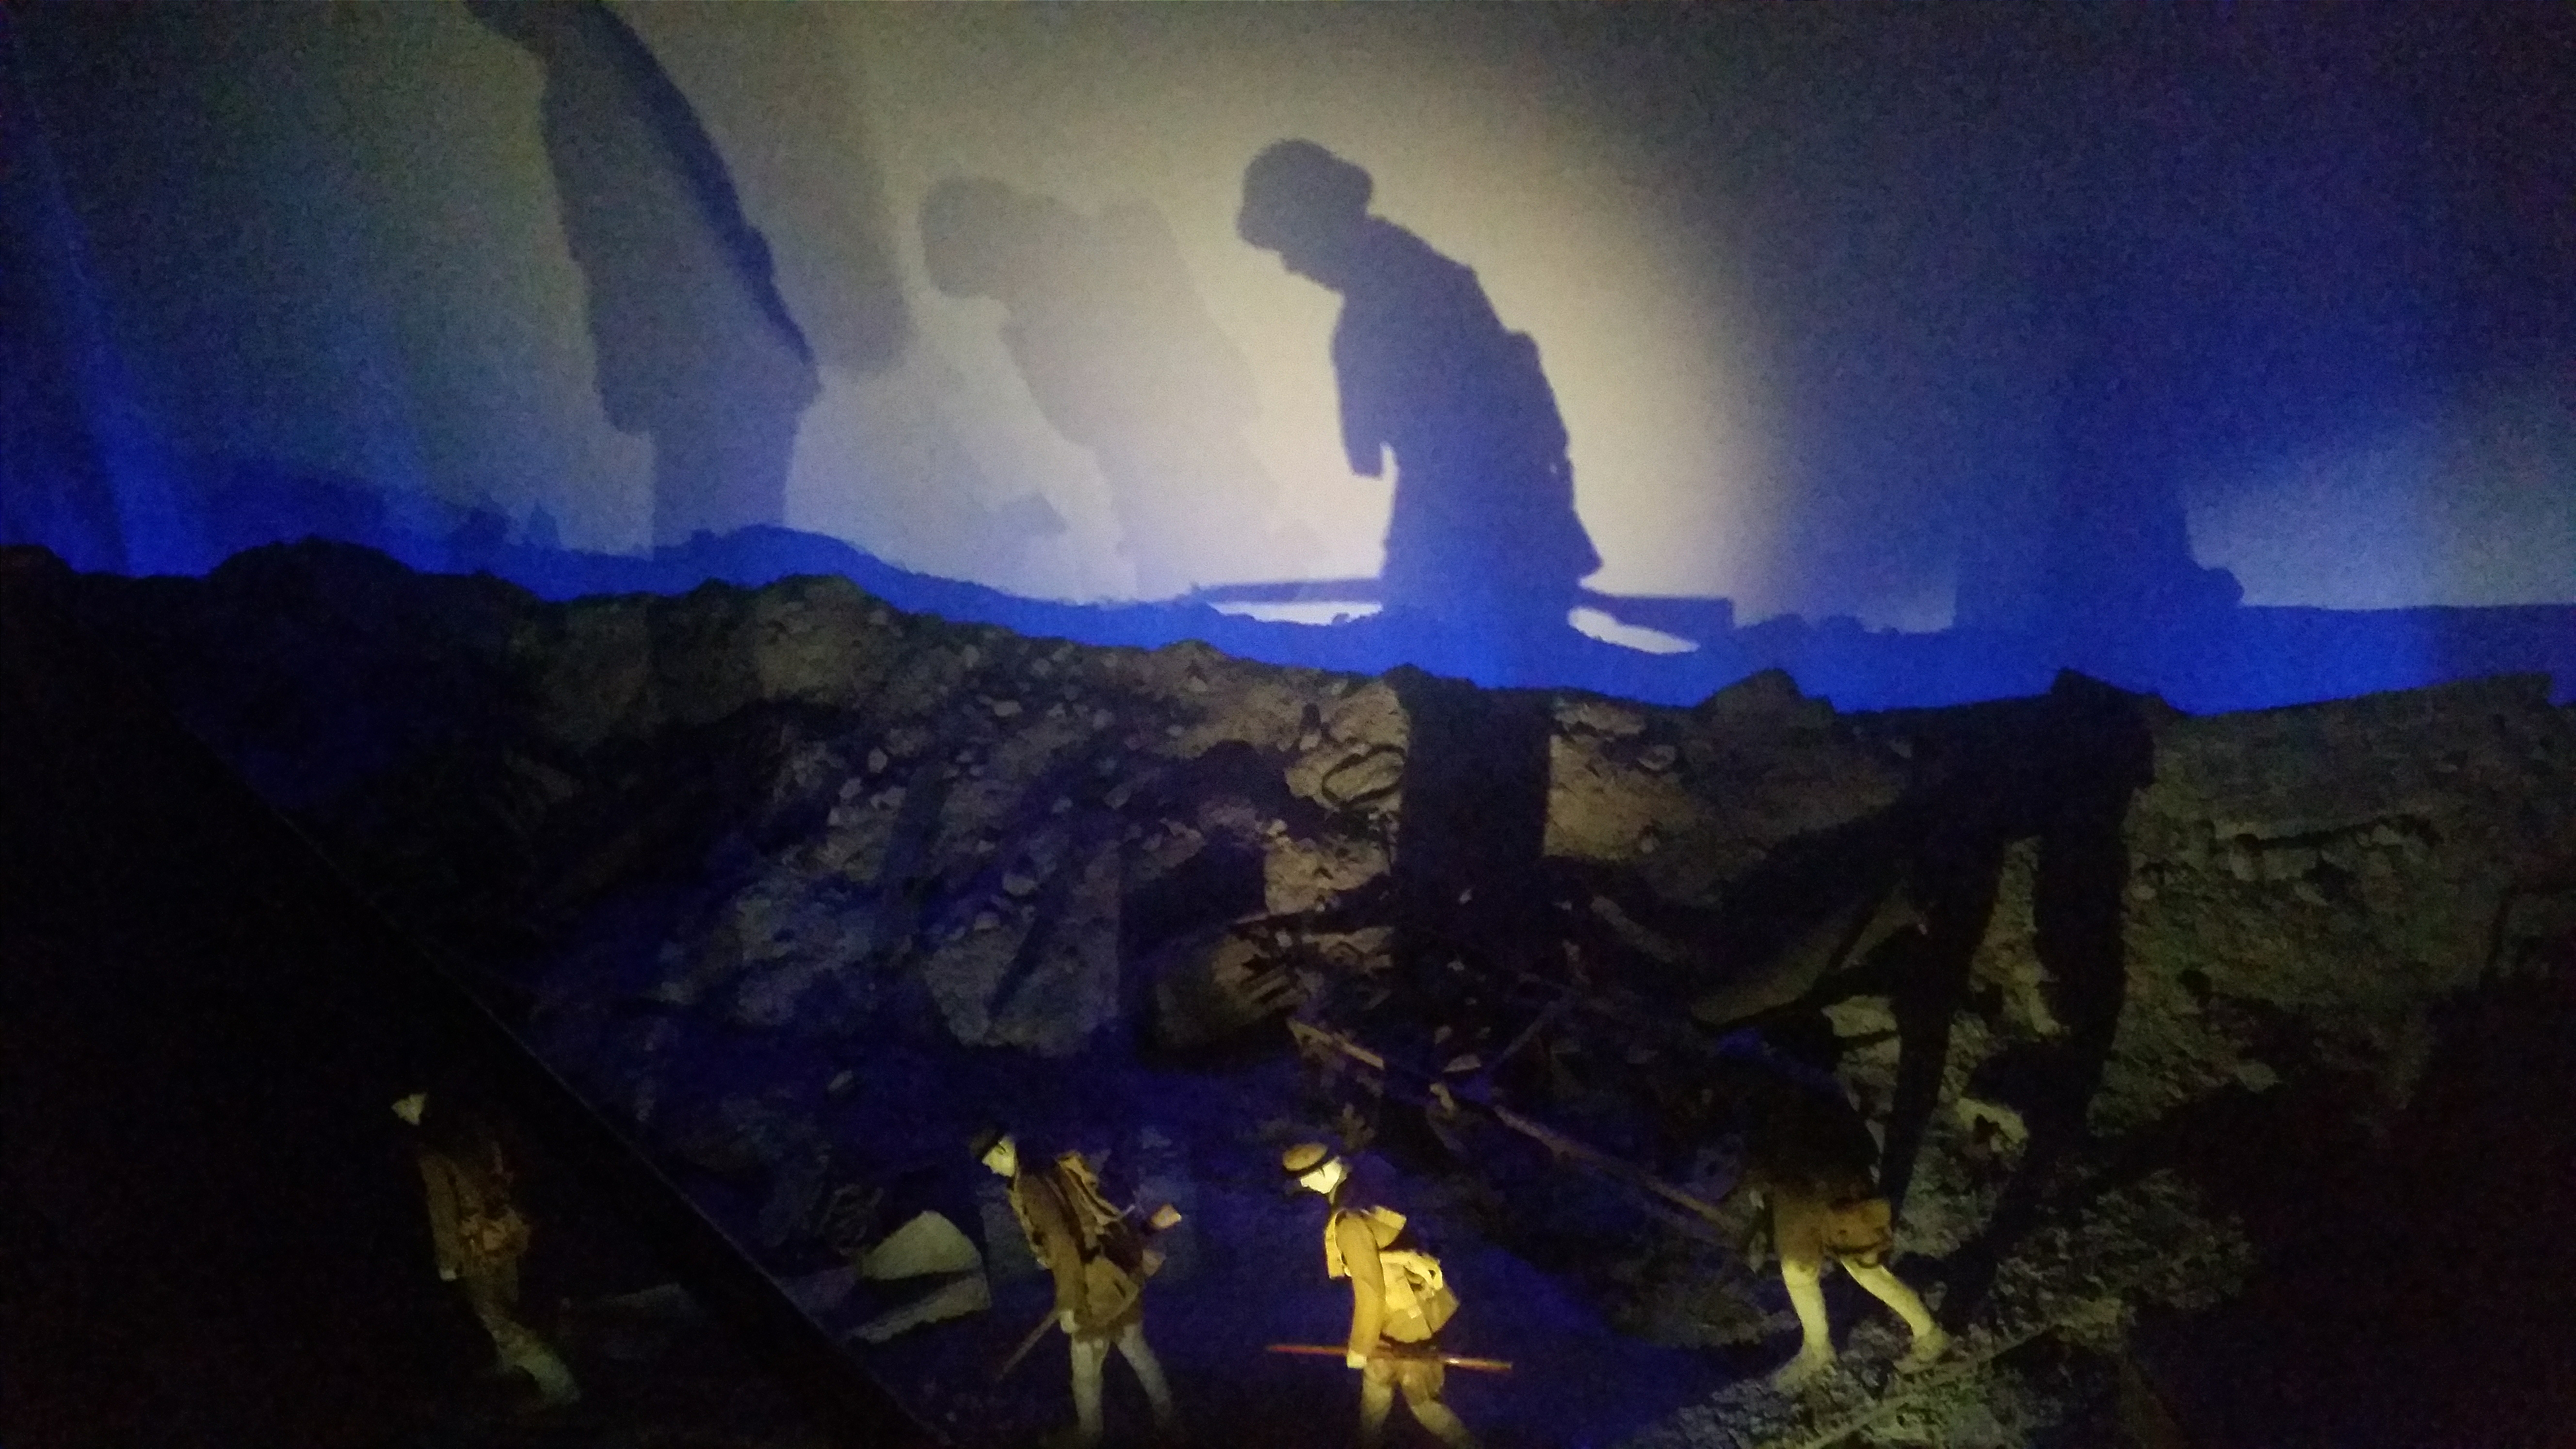 Diorama of men in the hellish trenches.